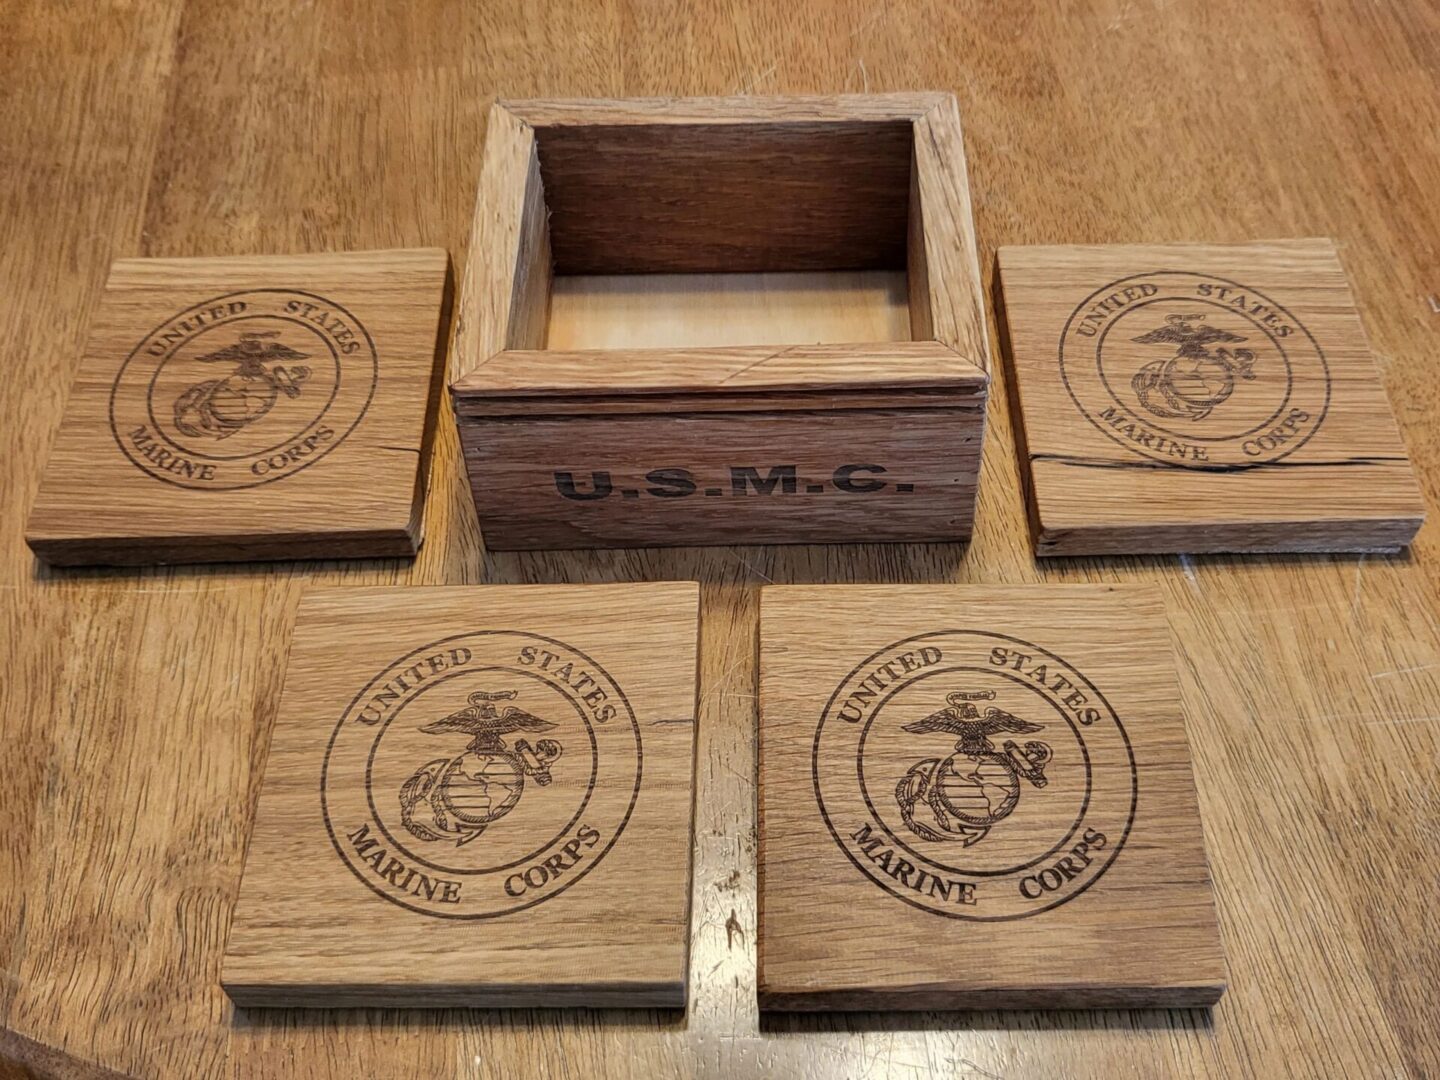 US Marine Corps wooden plates